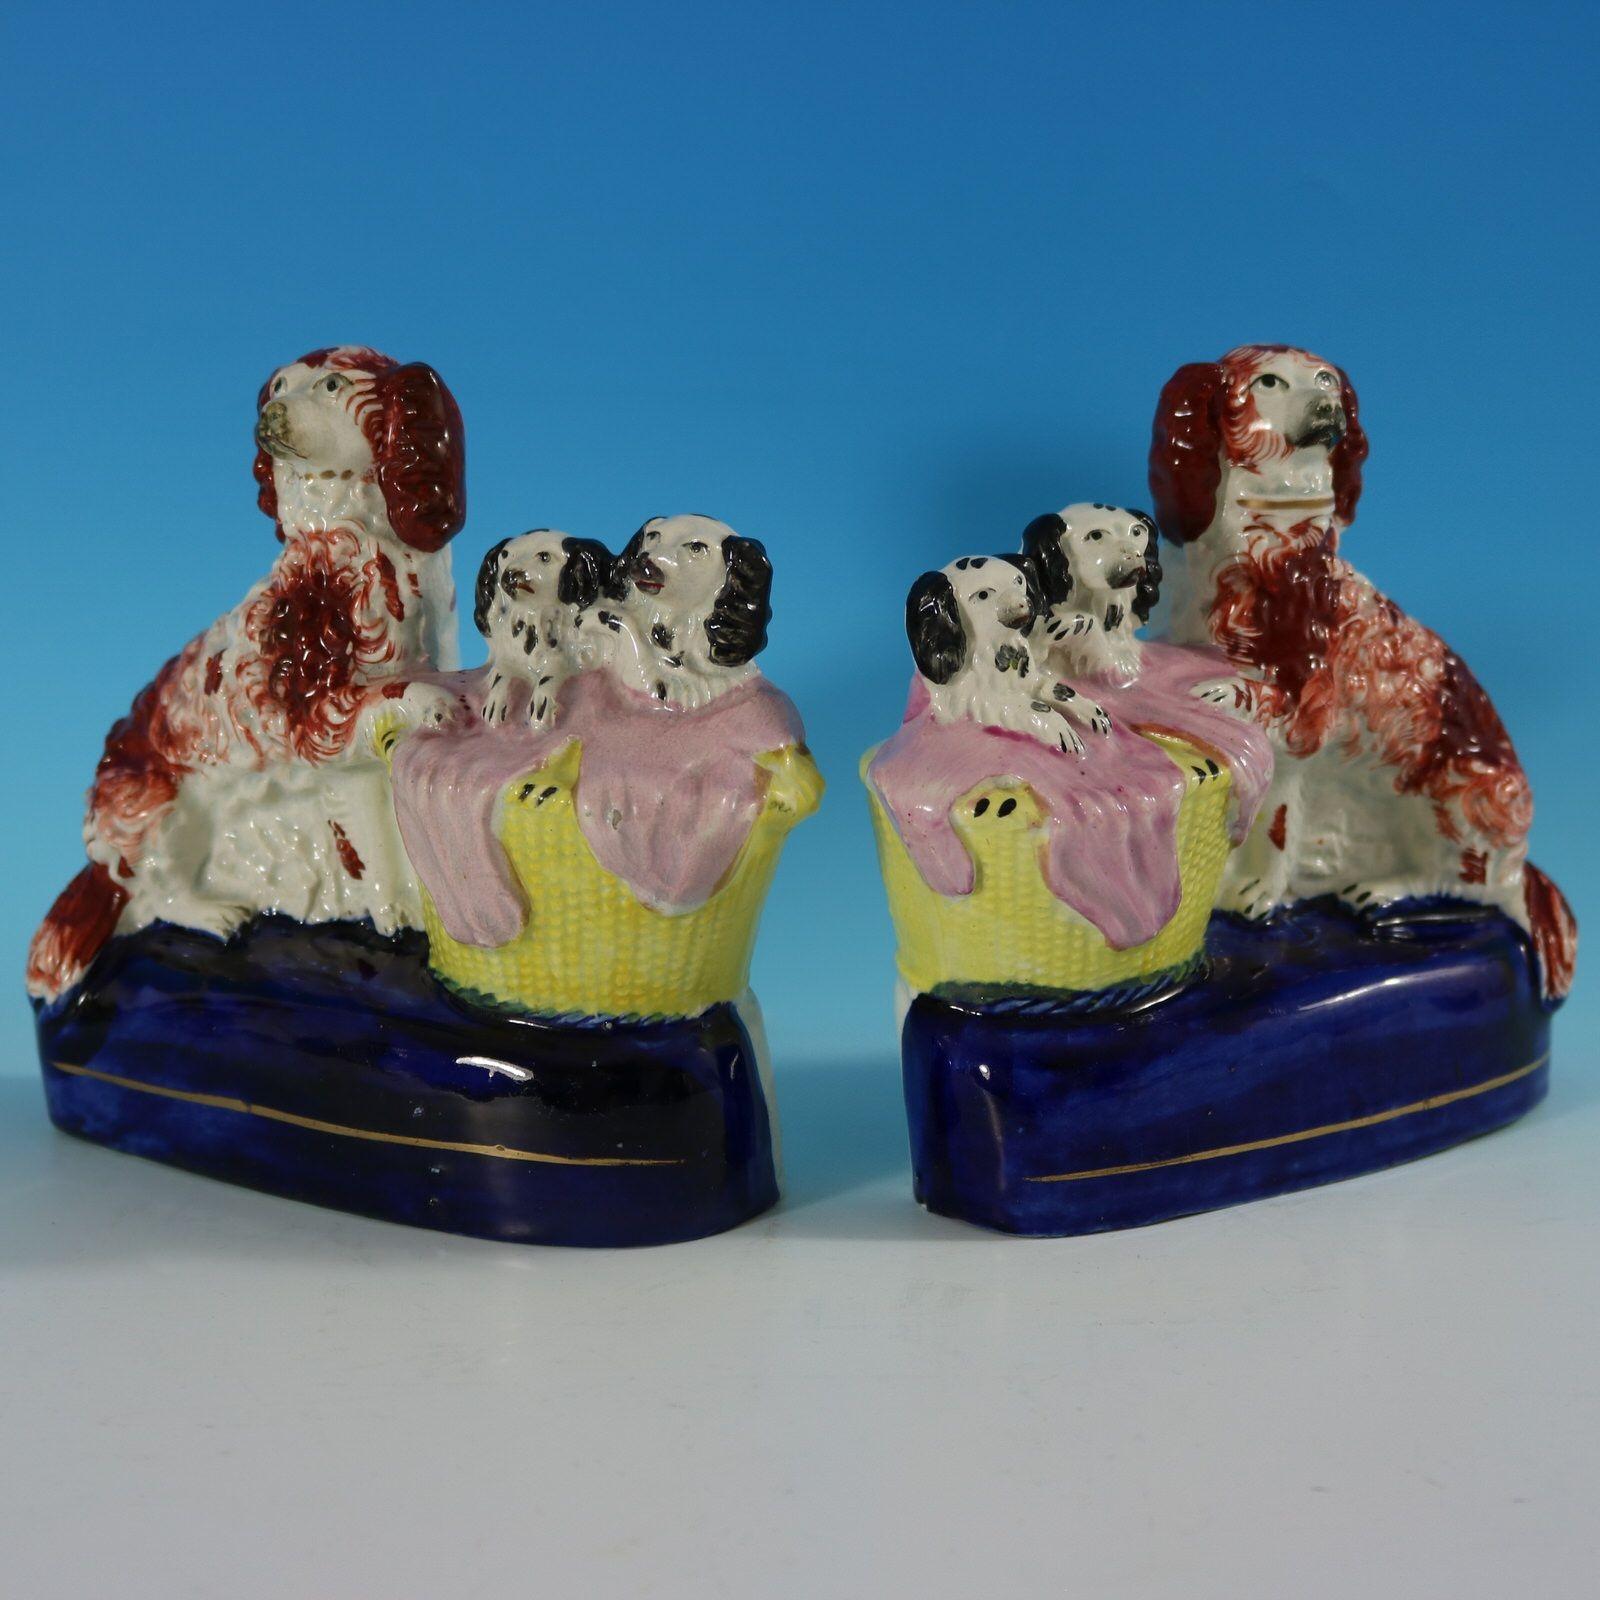 Pair of Staffordshire Pottery groups which feature a spaniel and her pups in a wicker wash basket, seated on an oval base. Dull gilt base line and embellishment. Decorated mainly to the front. Book reference ,'Victorian Staffordshire Figures